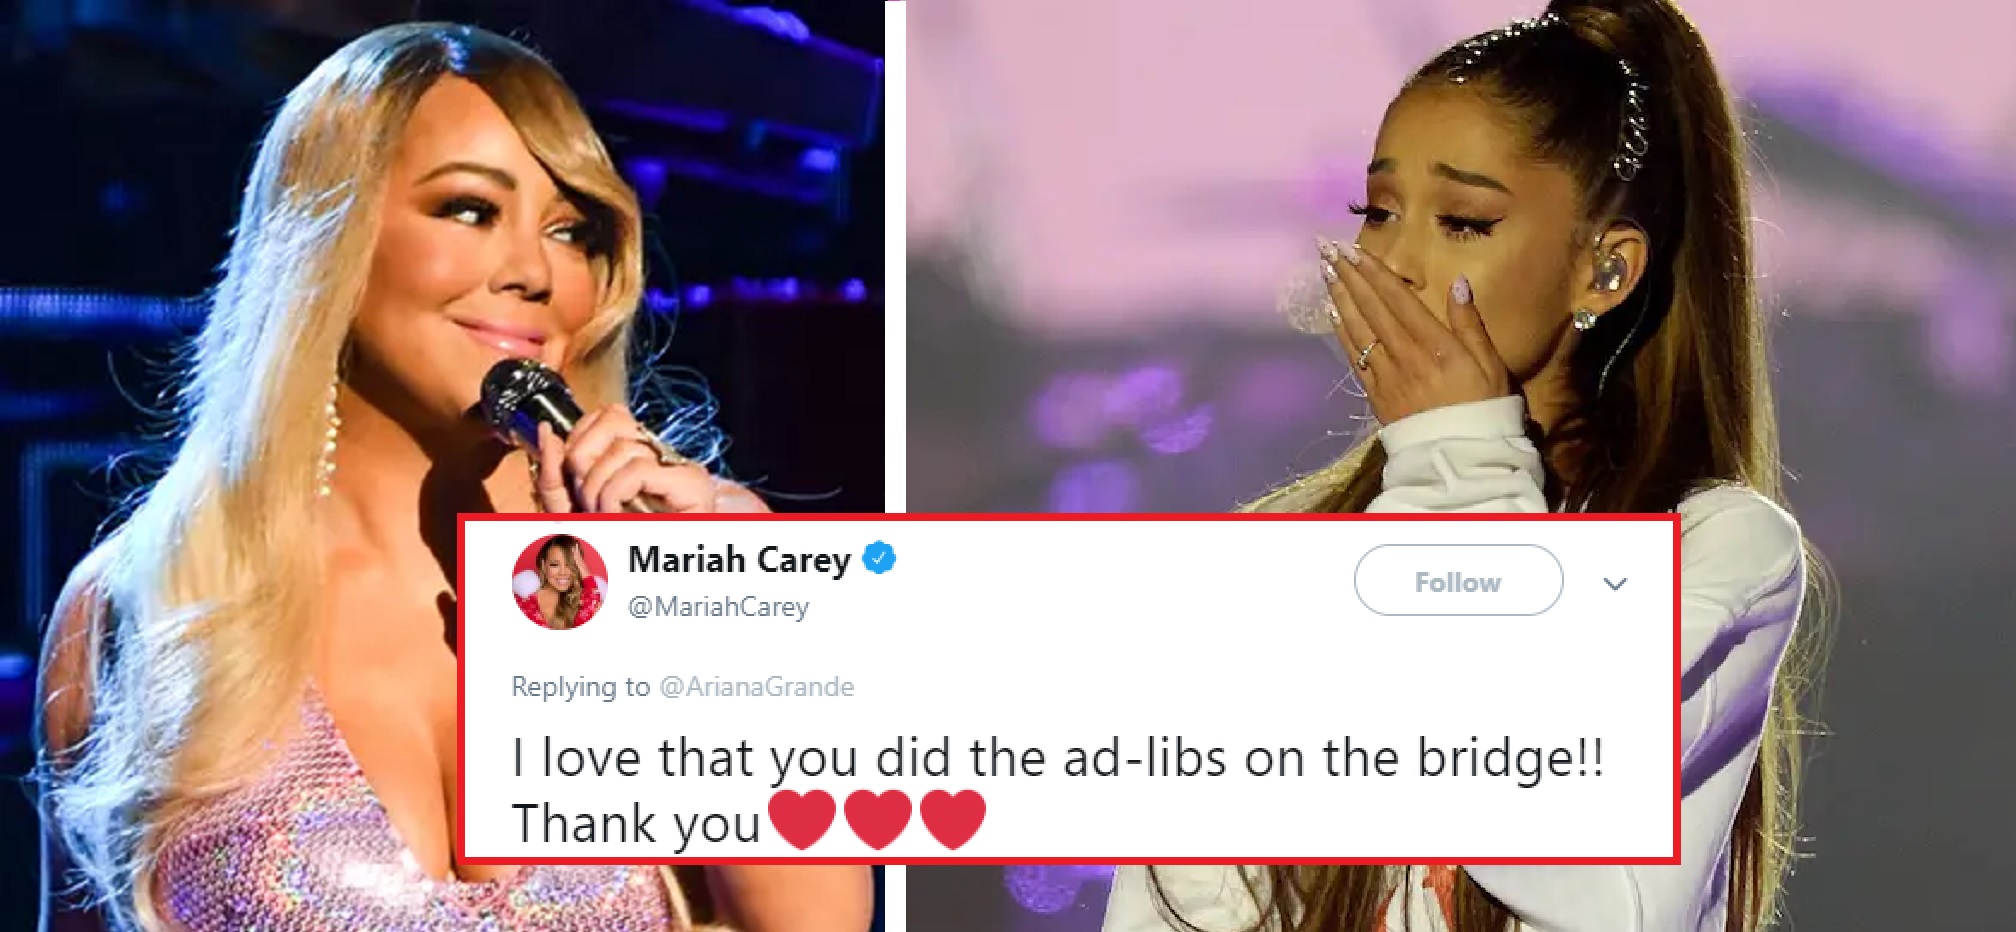 Ariana Grande & Mariah Carey Share Cute Twitter Exchange, After ‘AIWFCIY’ All-Star Anniversary-Video!